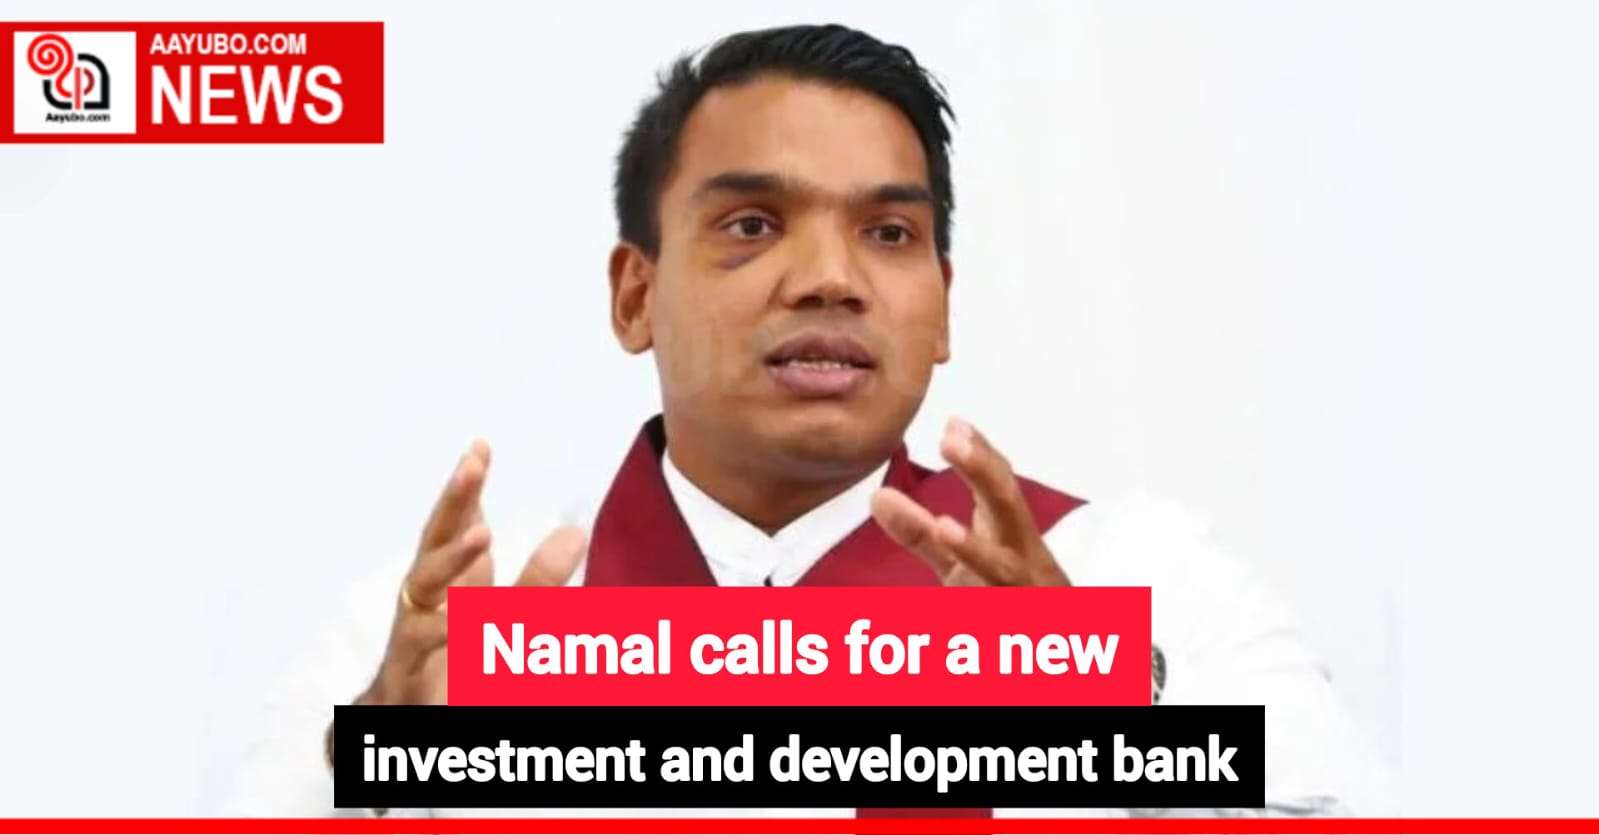 Namal calls for a new investment and development bank